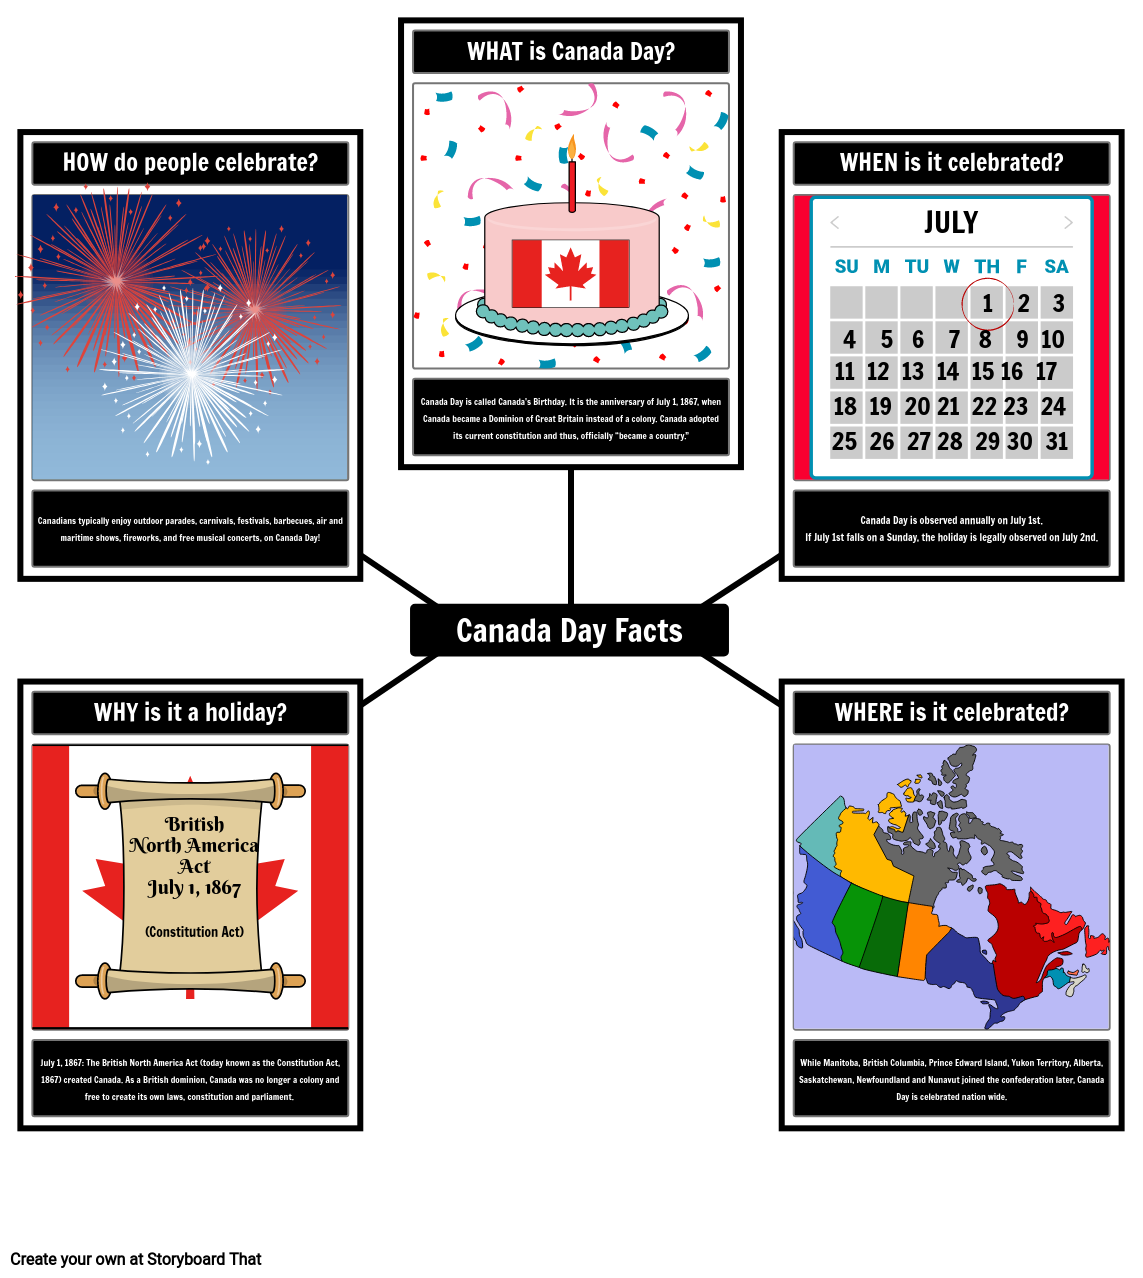 Canada Day Facts